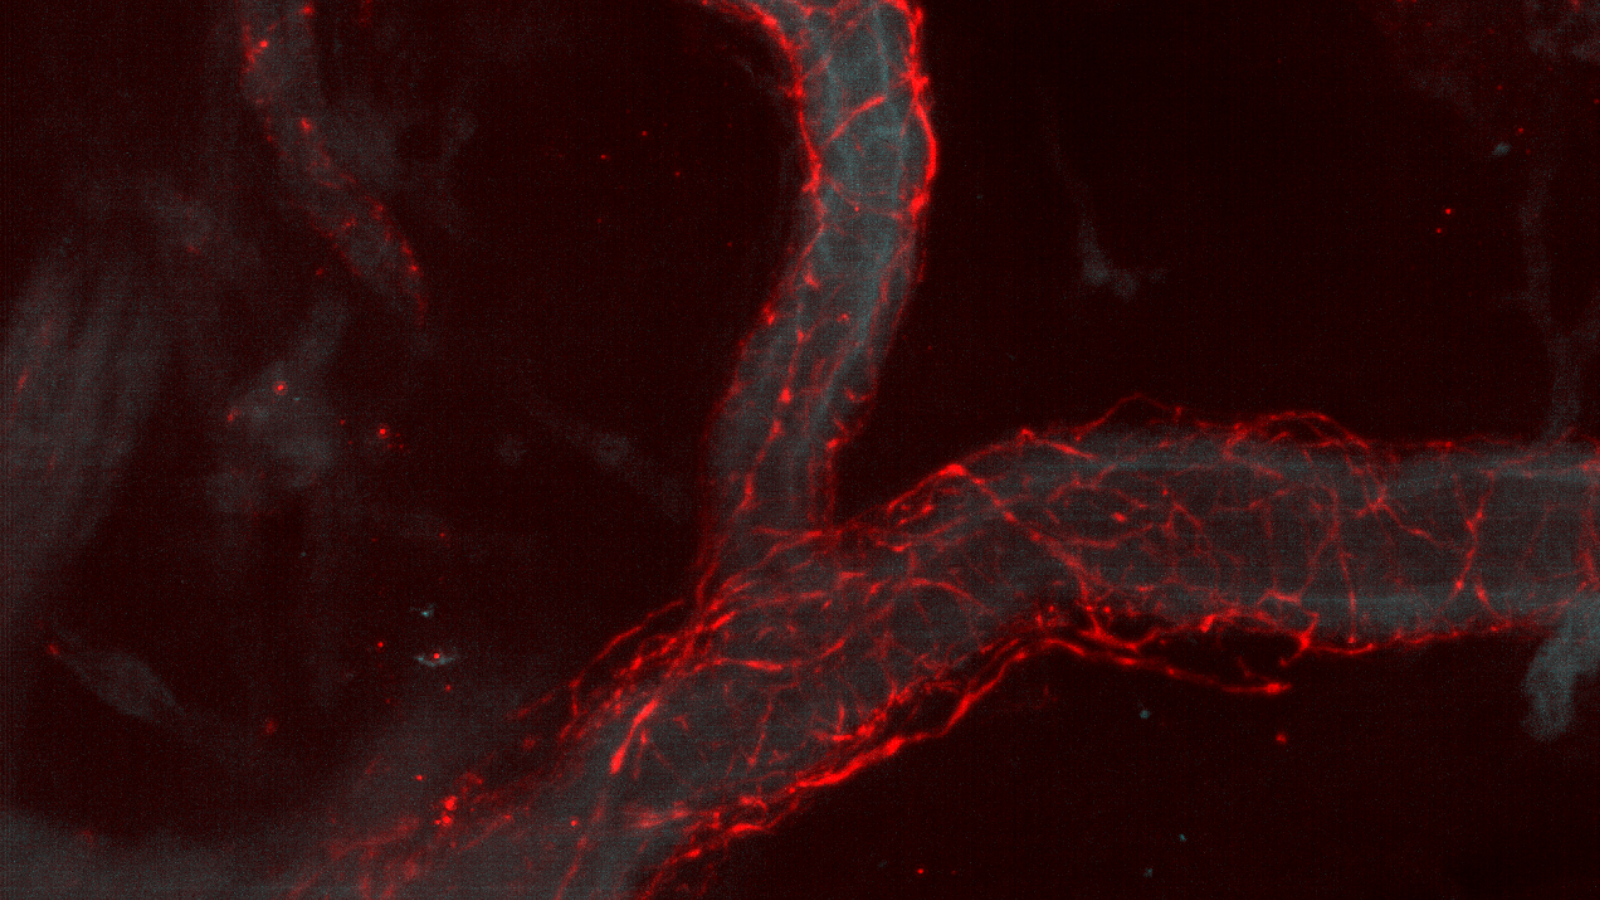 A human splenic blood vessel (cyan) surrounded by the tyrosine hydroxylase matrix (red) from axons near the blood vessel, courtesy of Dr. Seth Currlin, University of Florida